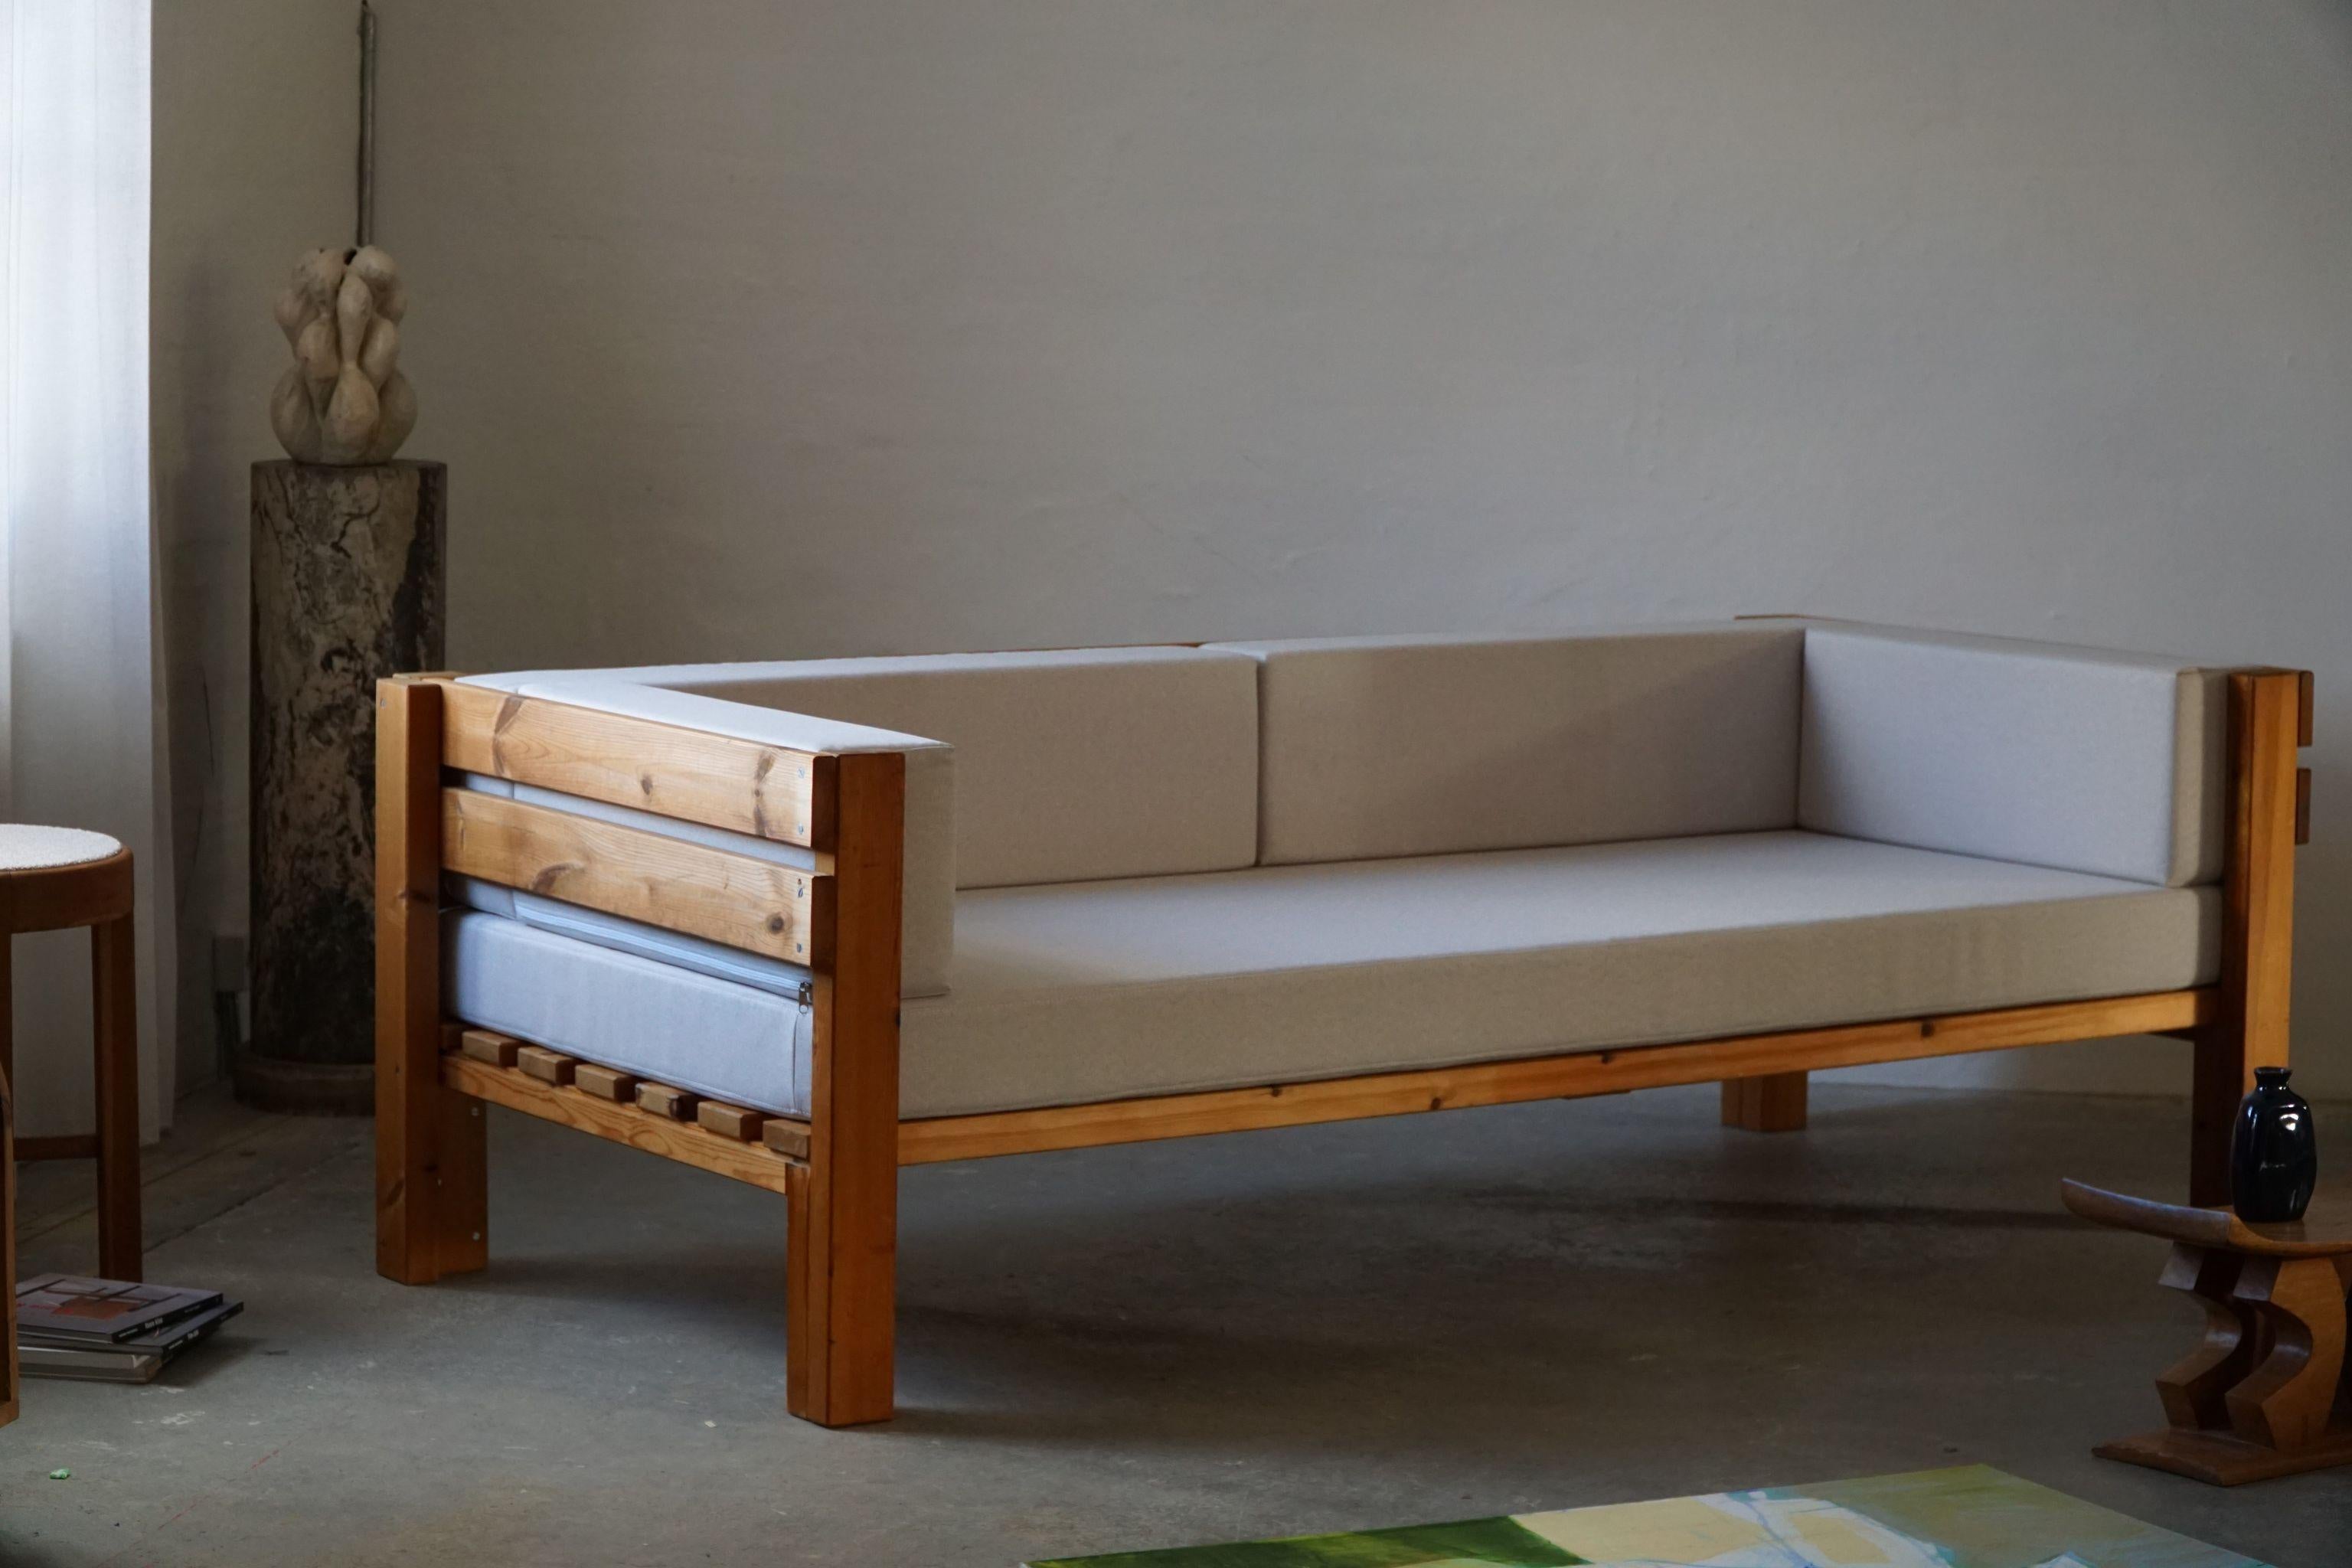 Wool Danish Modern Sofa, Reupholstered, Made in Pine, by Nyt i Bo, 1970s